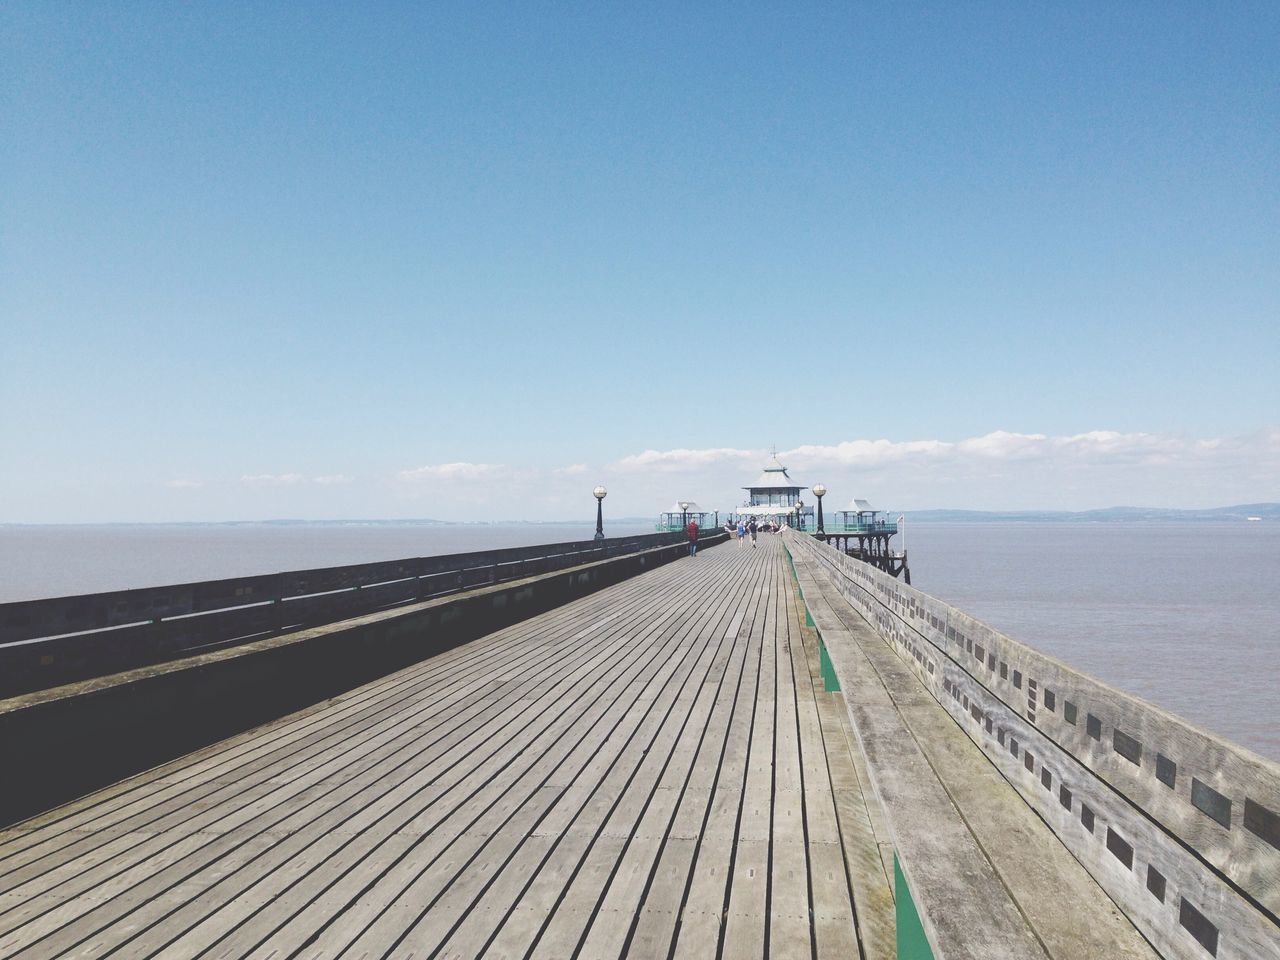 the way forward, sea, diminishing perspective, horizon over water, vanishing point, sky, transportation, blue, water, long, railing, copy space, tranquility, tranquil scene, nature, empty, built structure, road, day, pier